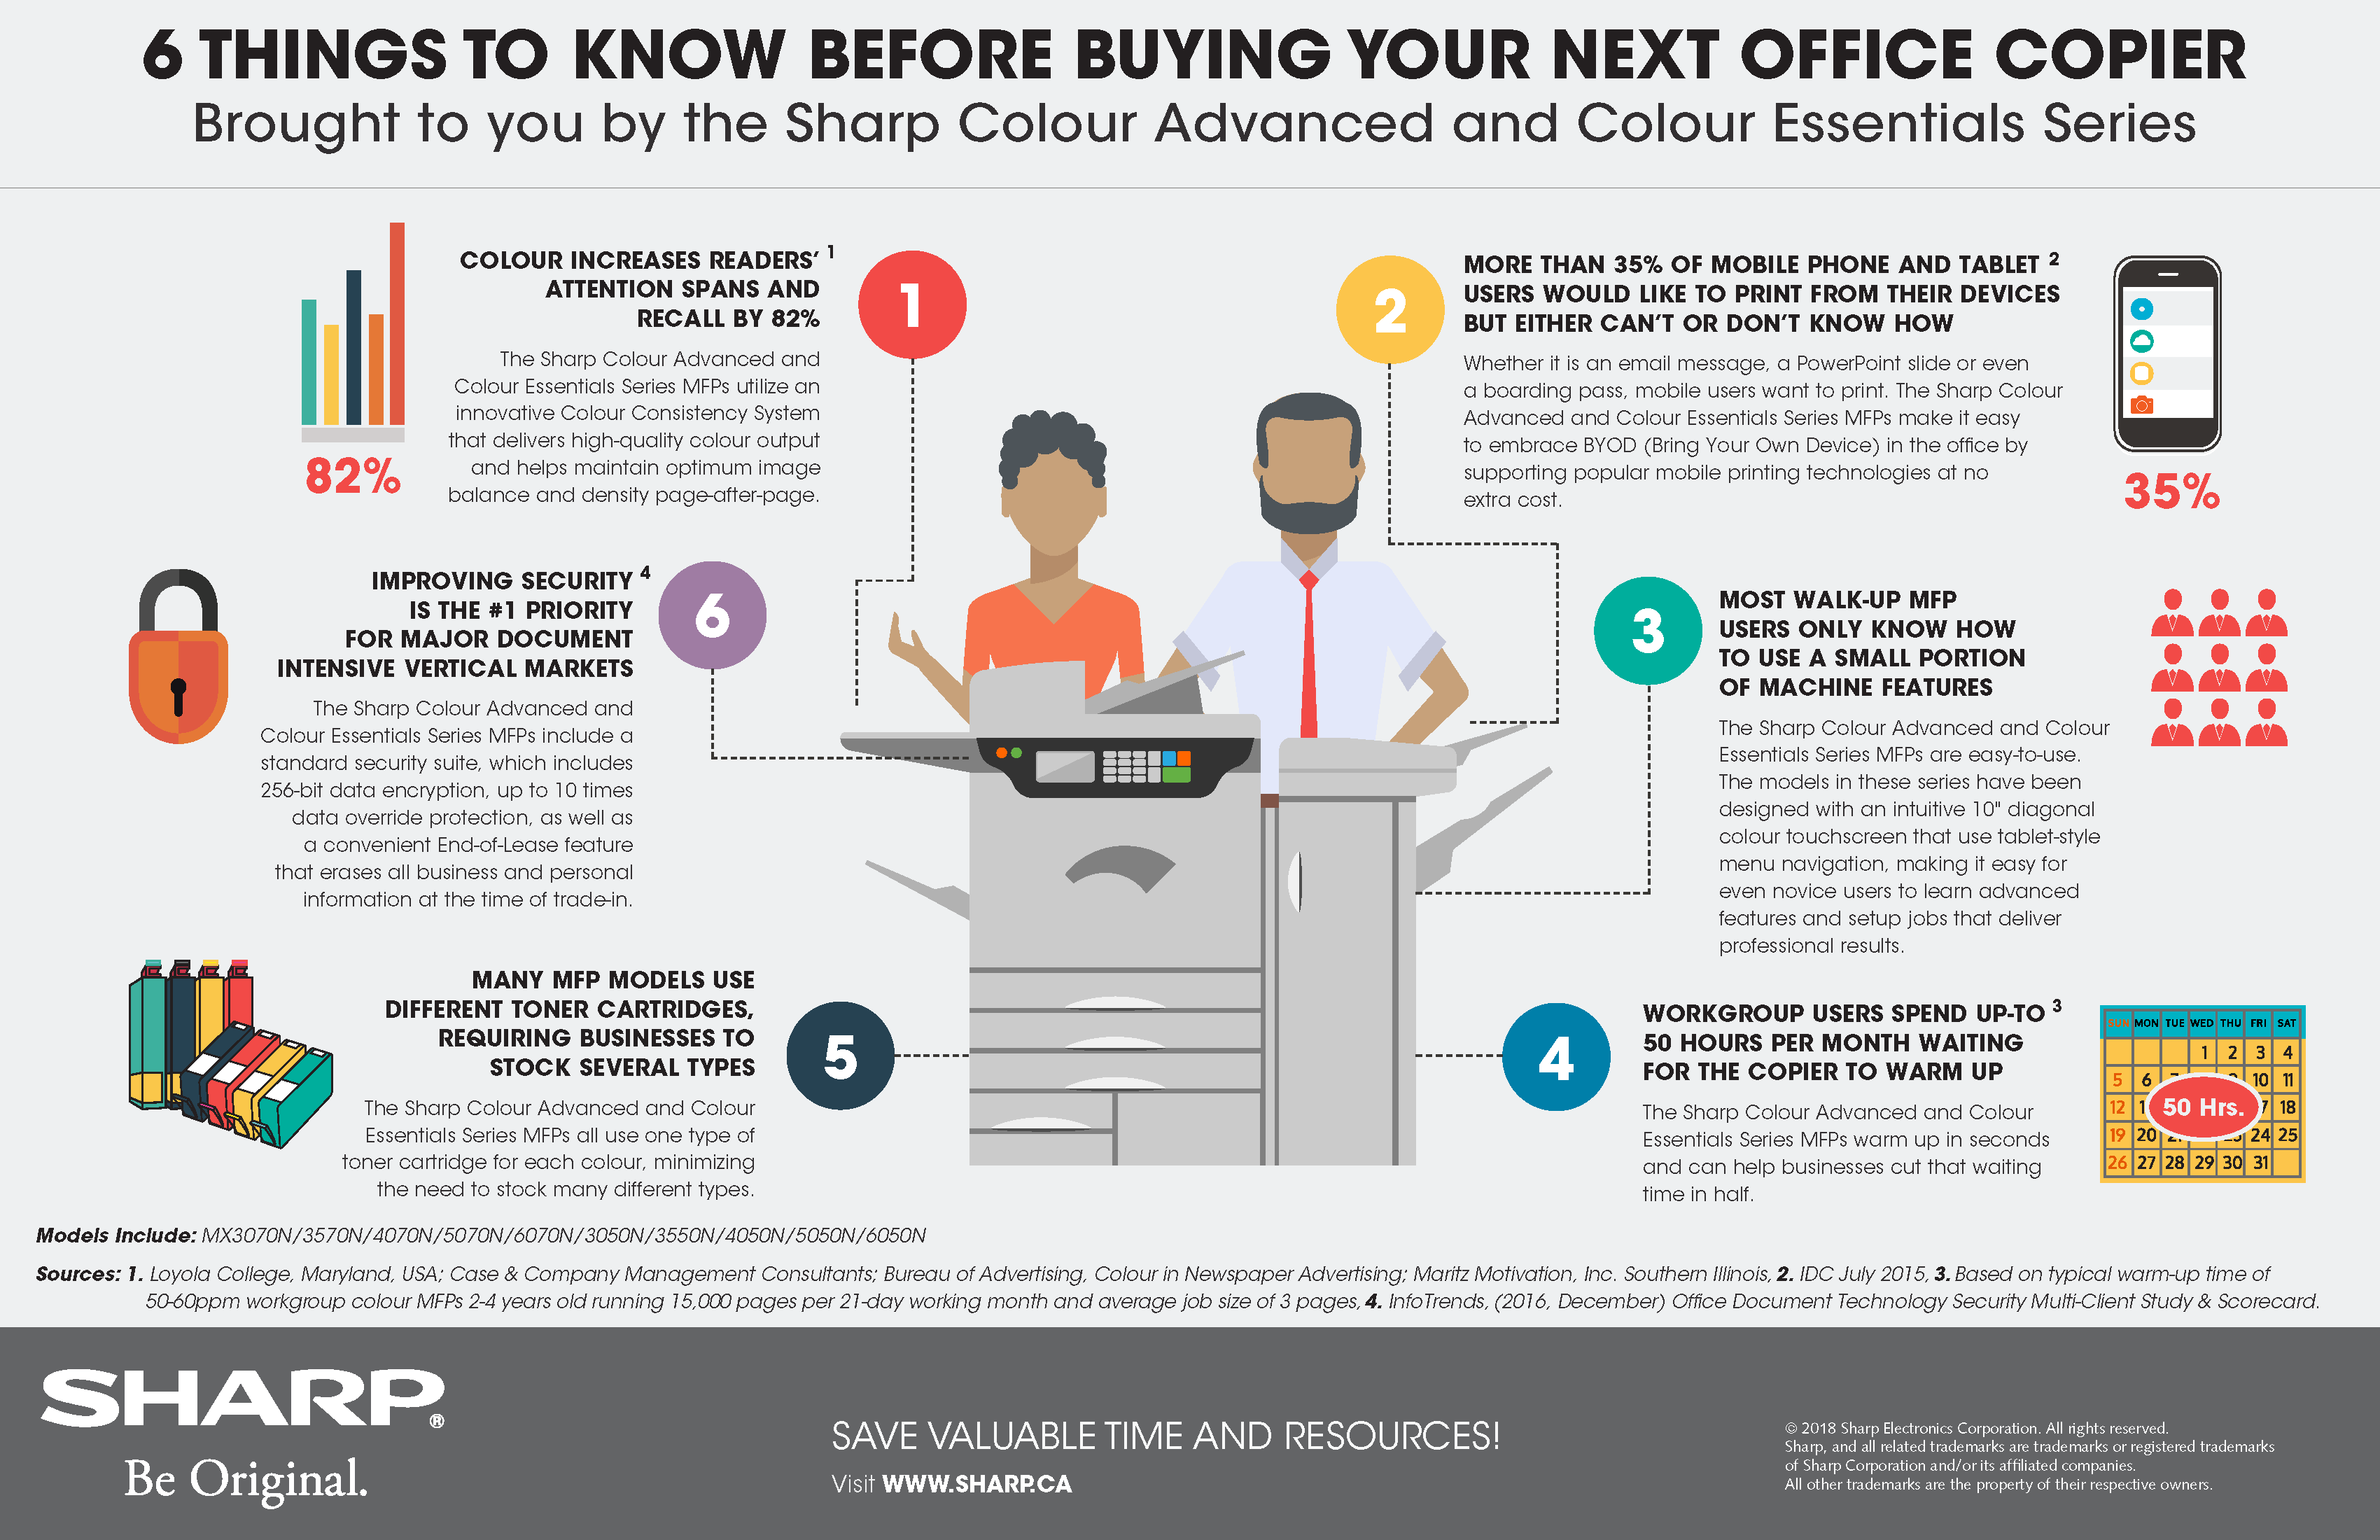 6 Things To Know Before Buying Your Next Office Copier